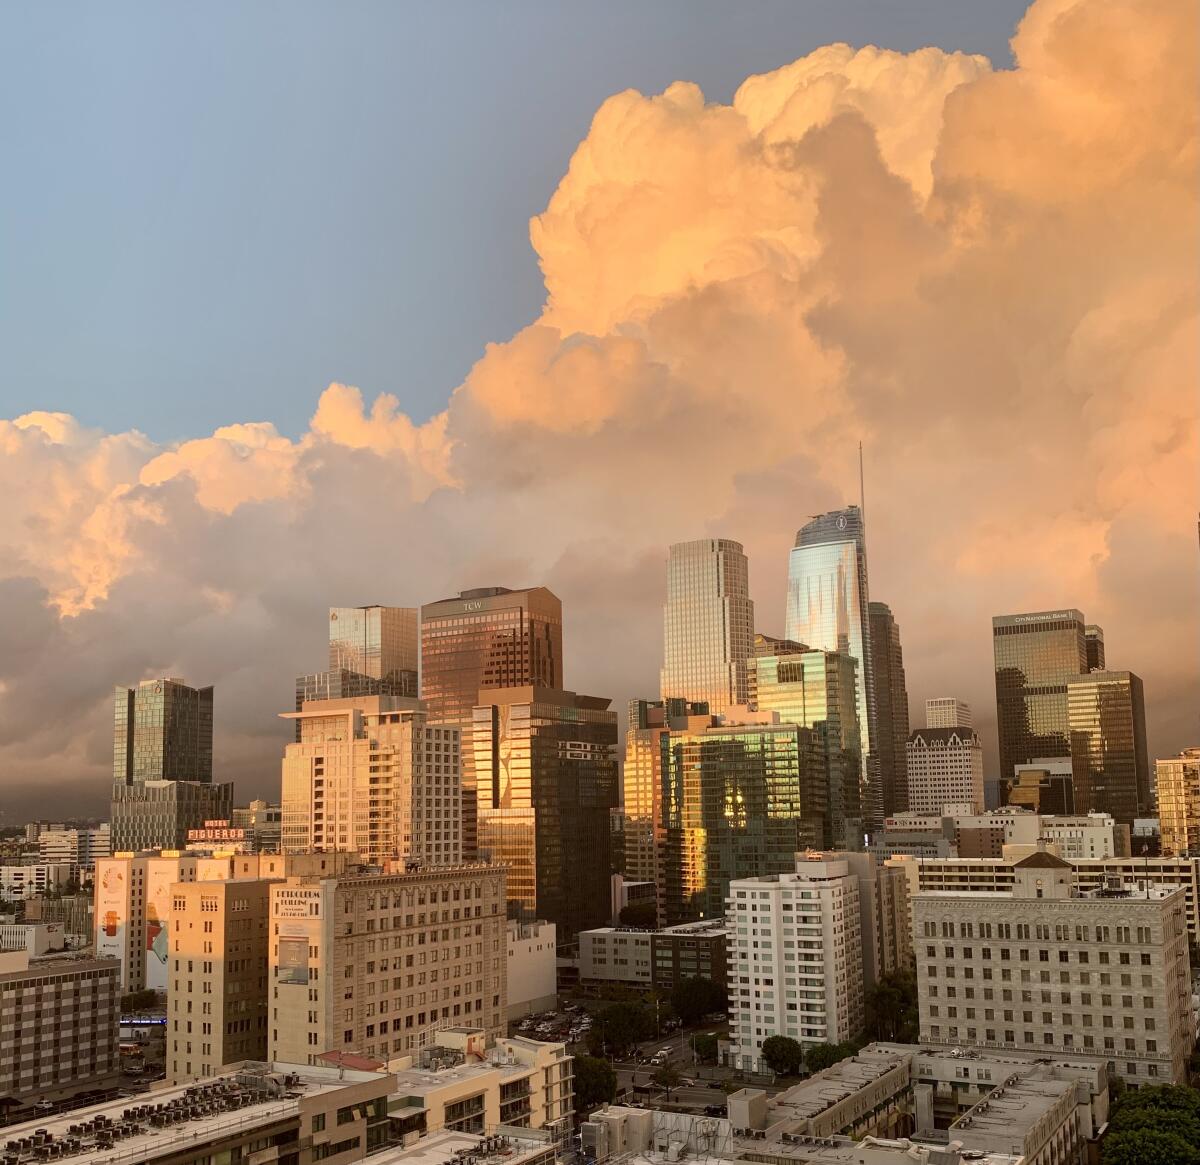 Downtown Los Angeles in 2019.